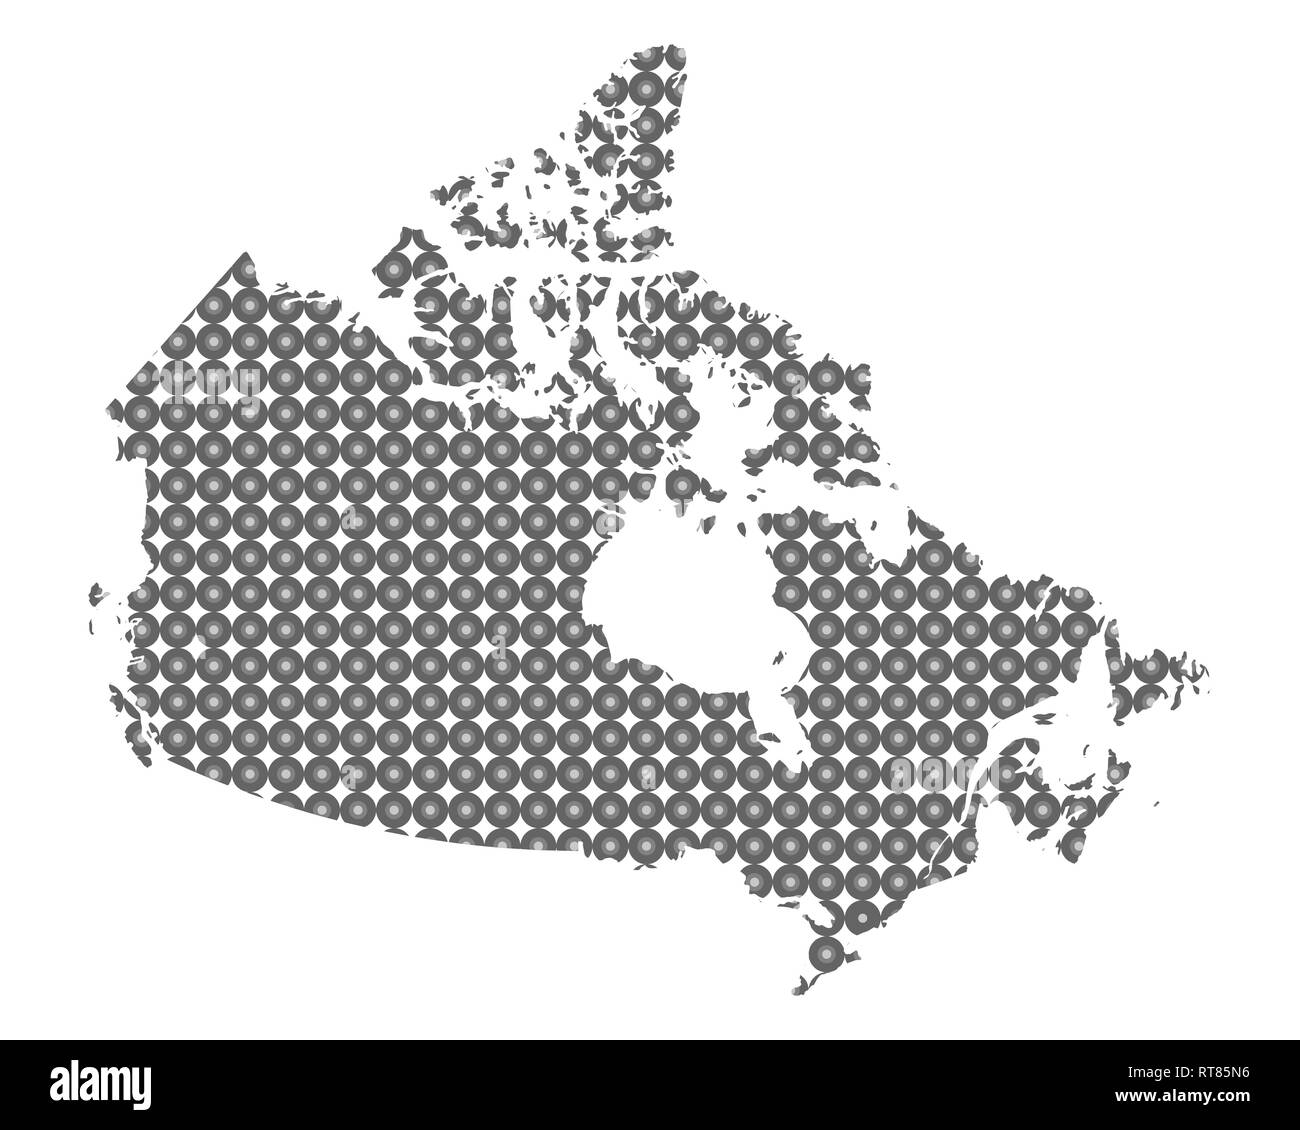 Map of Canada in circles Stock Photo